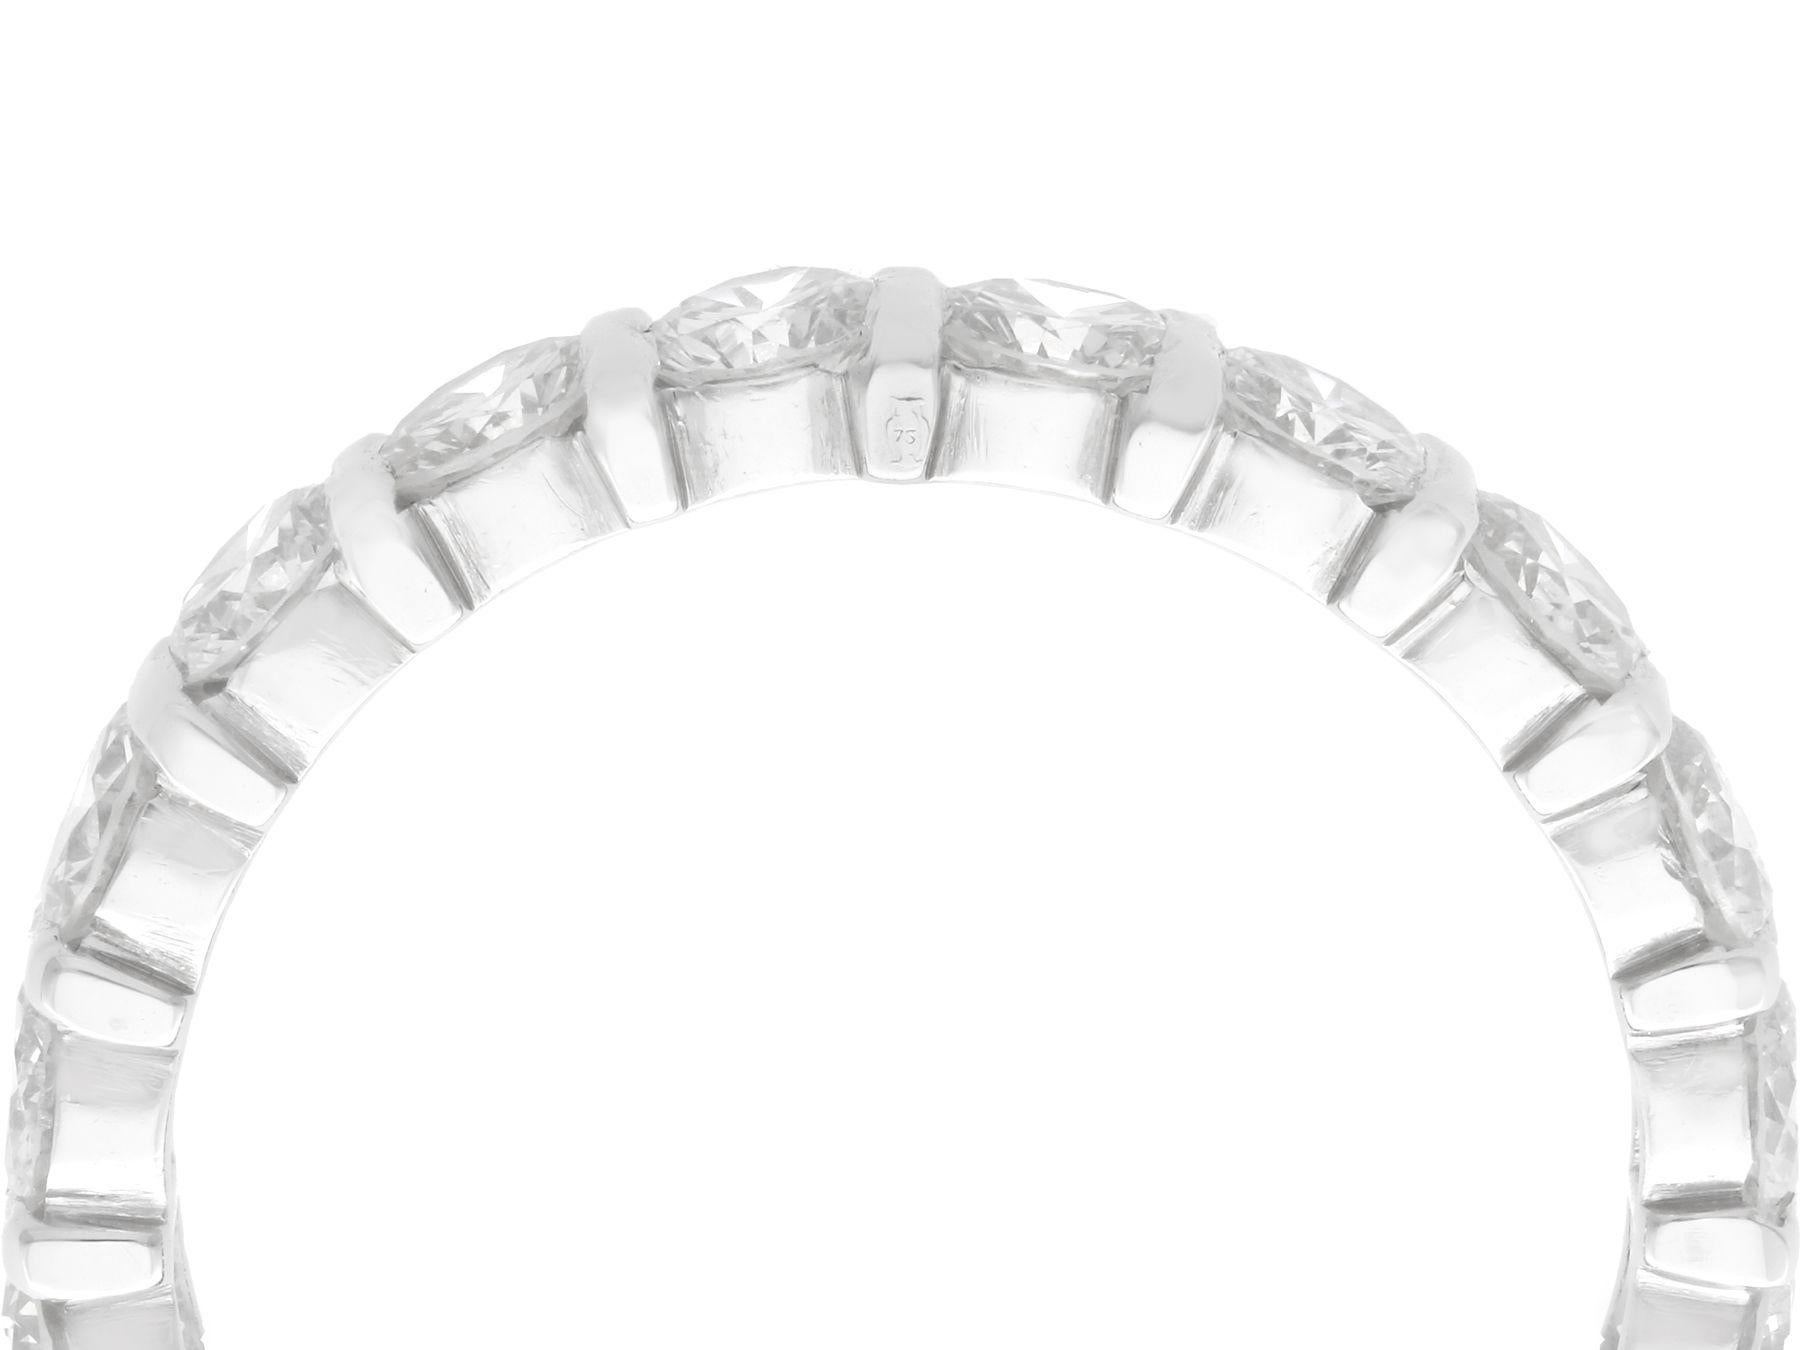 A stunning, fine and impressive 3.42 carat diamond and 18 karat white gold full eternity ring; part of our diverse diamond jewellery and estate jewelry collections

This stunning, fine and impressive vintage diamond eternity ring has been crafted in